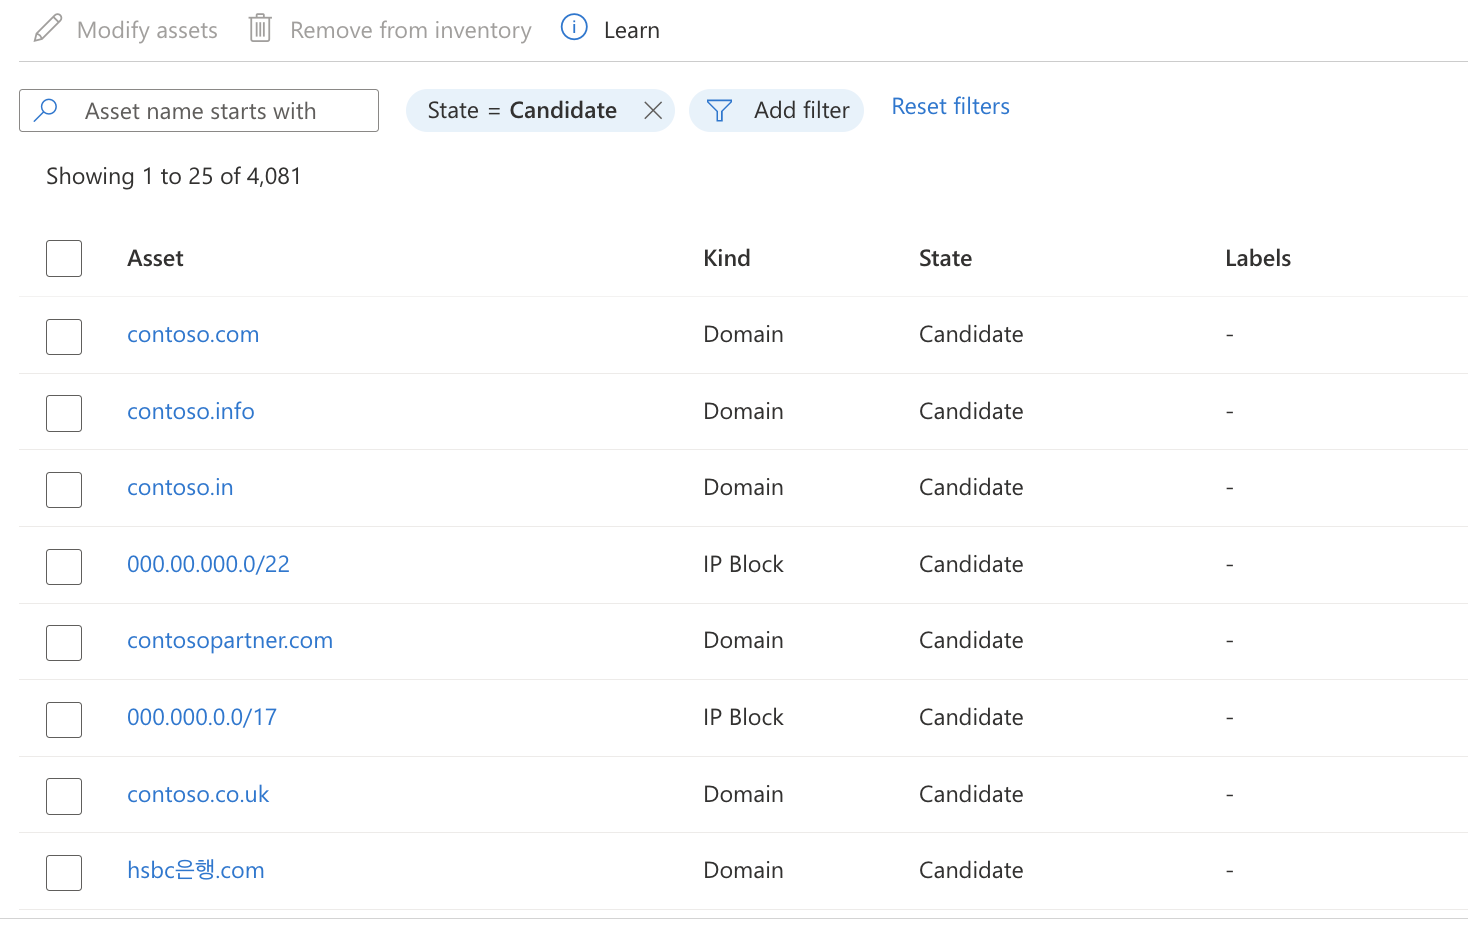 Screenshot that shows results returned when filtering for Candidate assets.